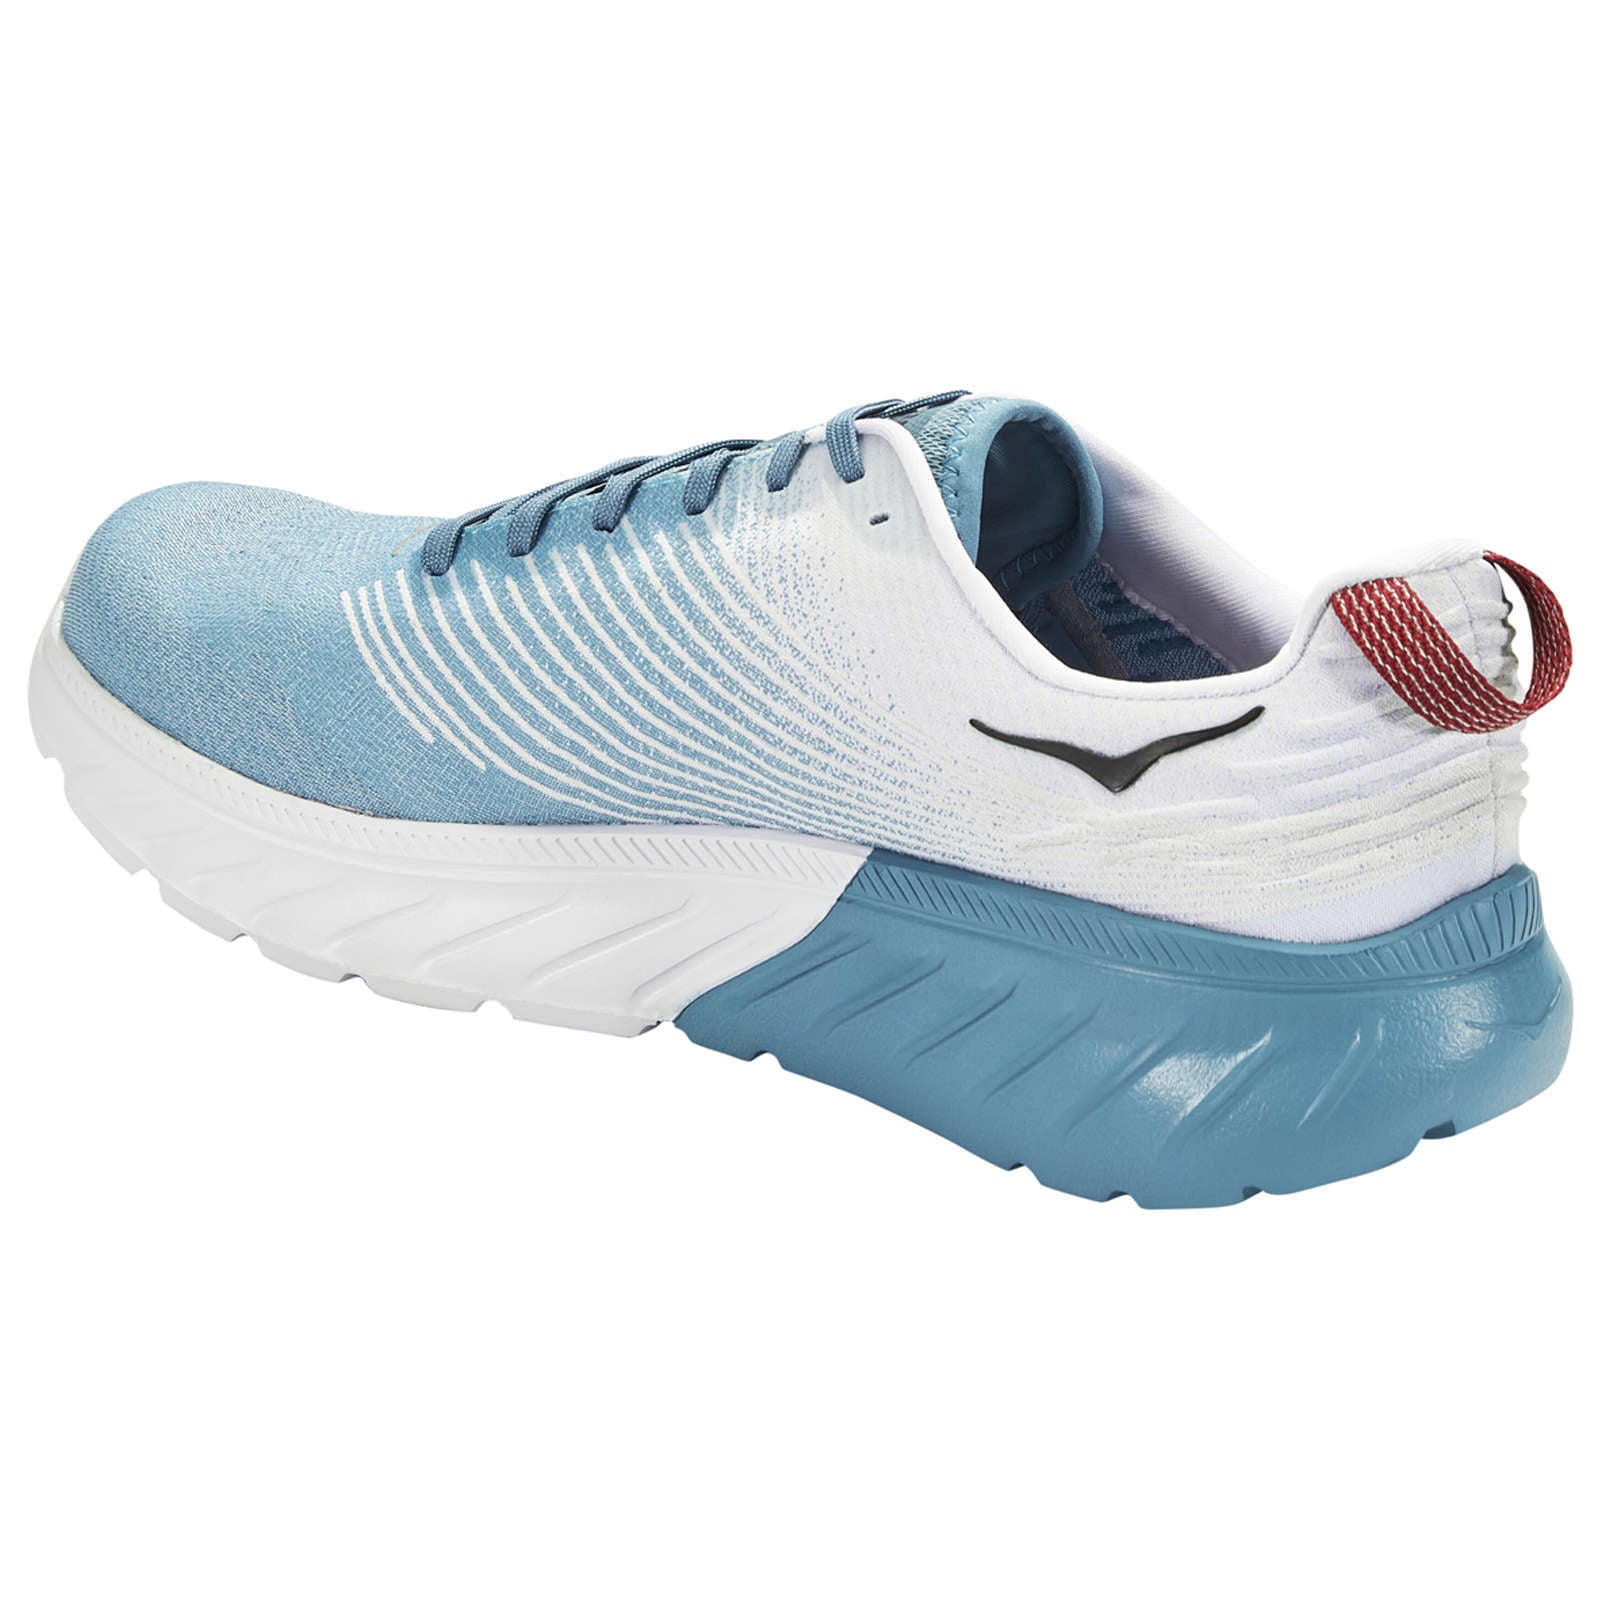 Hoka One One Mach 3 Mesh Men's Low-Top Road Running Trainers#color_blue moon white